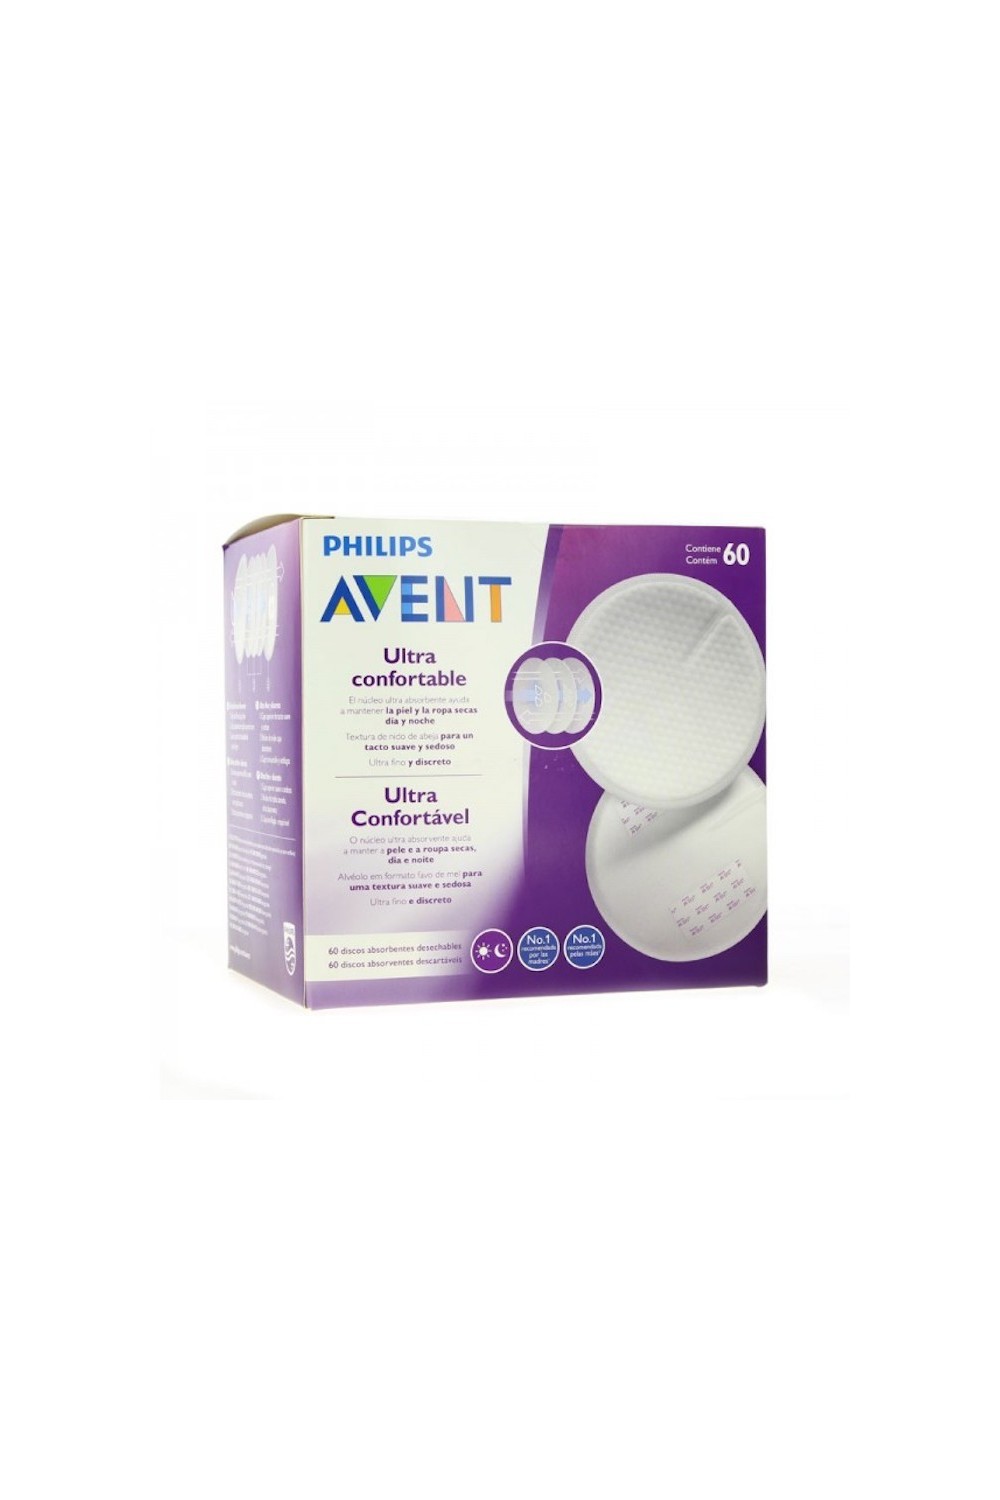 Avent Breastfeeding Absorbent Pads 60 pieces